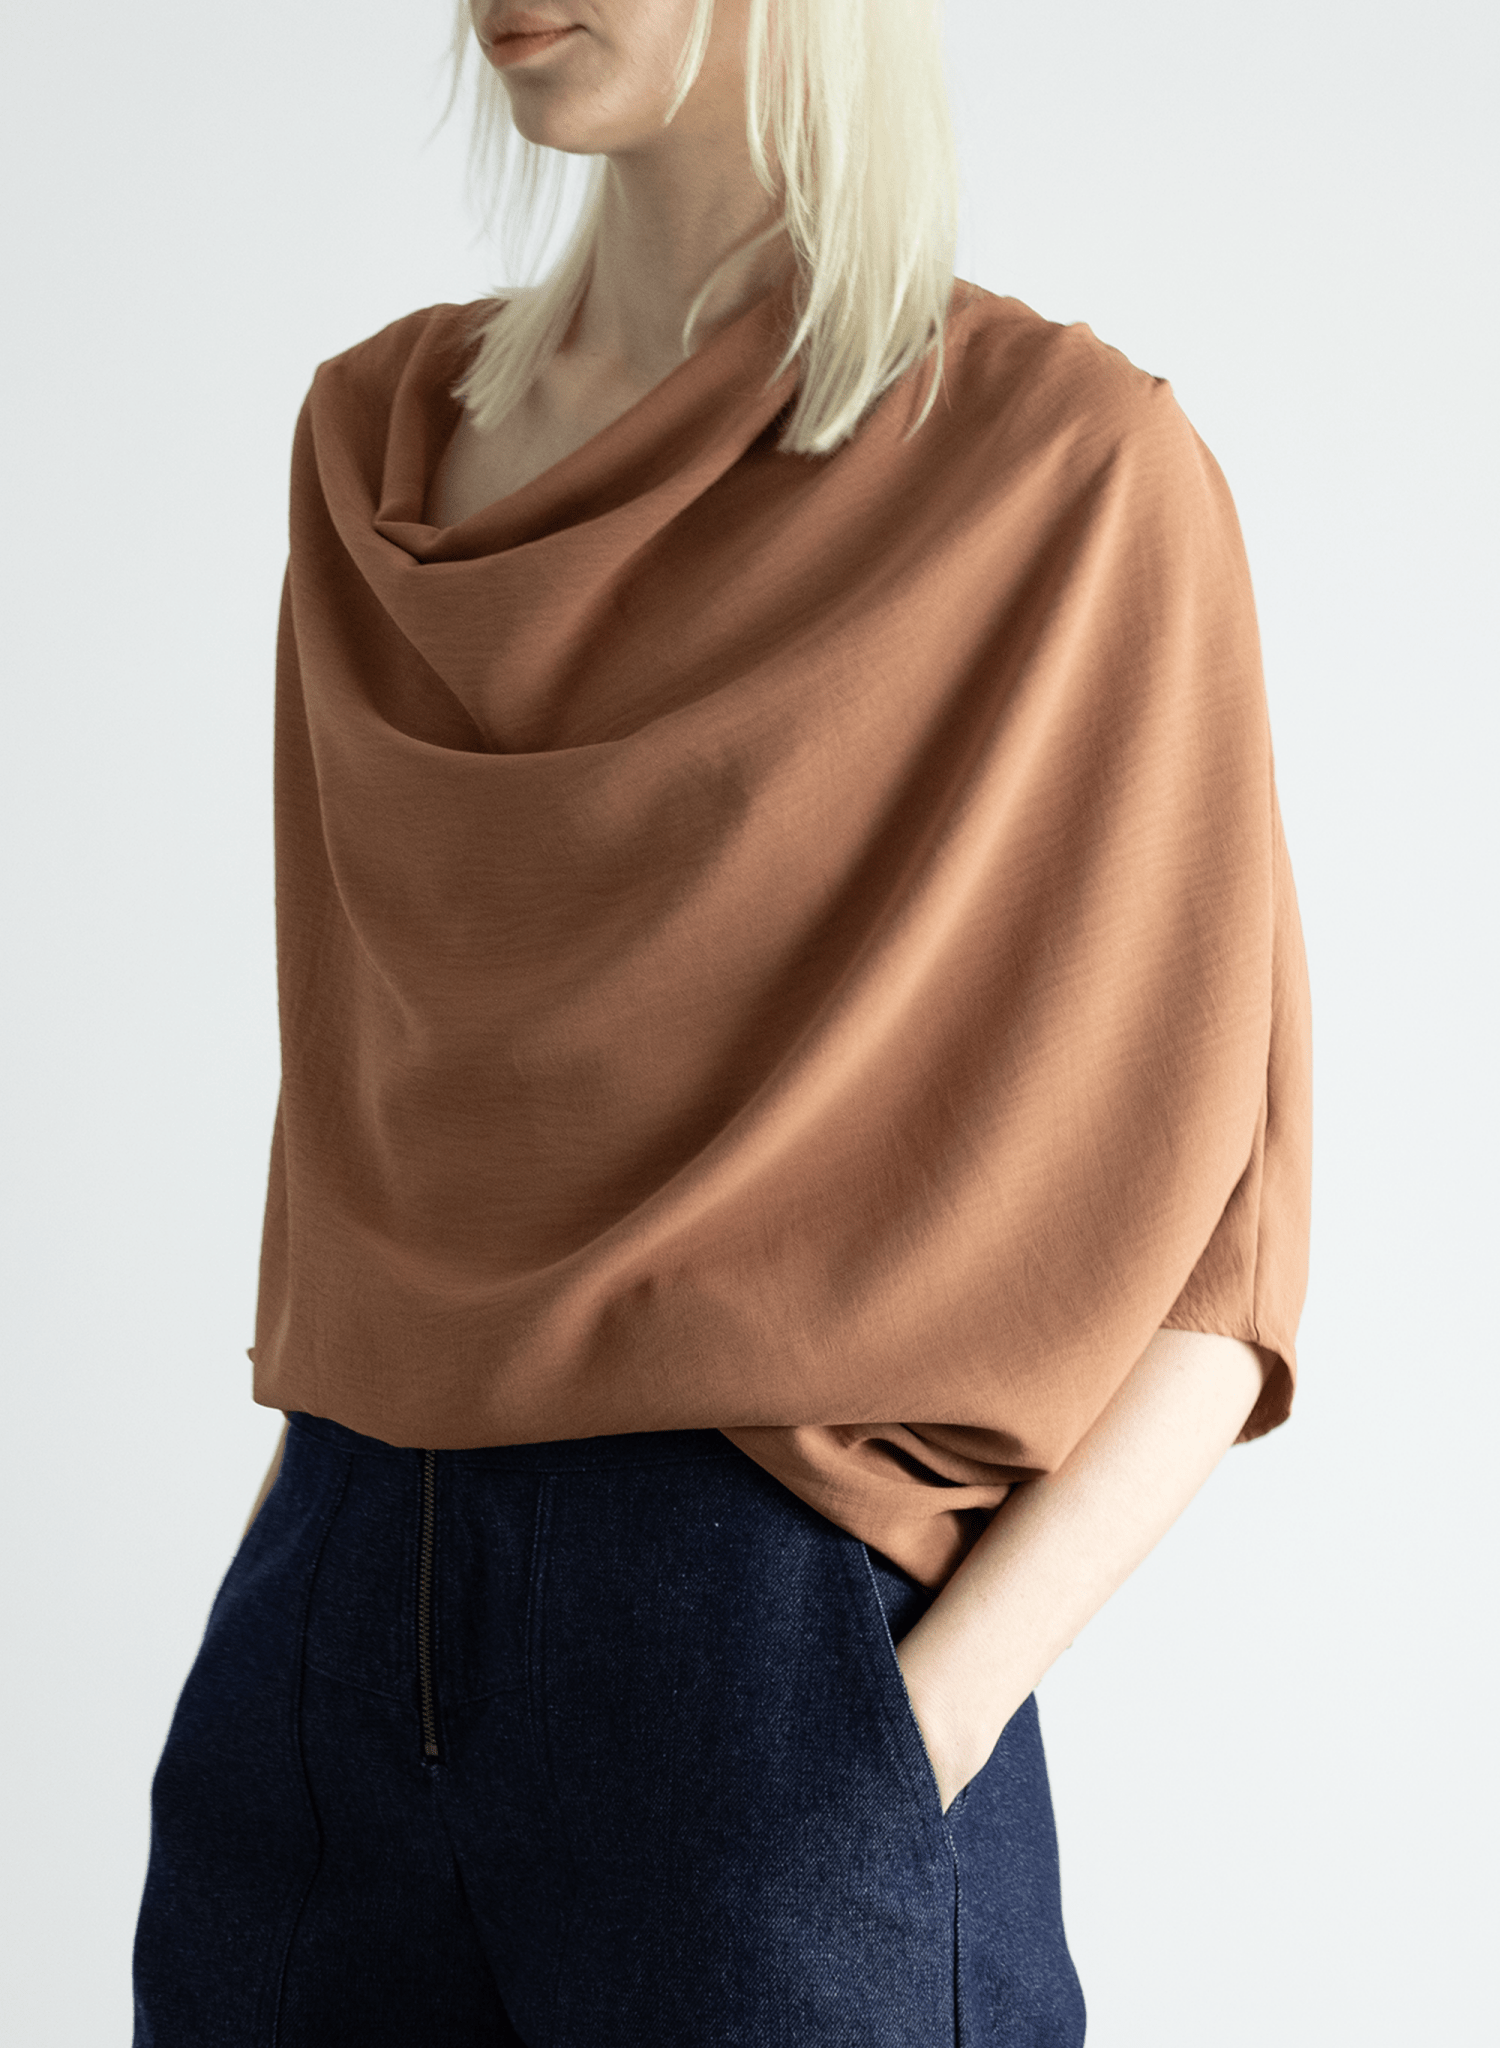 Abstraction Cowl Top - Latte - Meg Canada